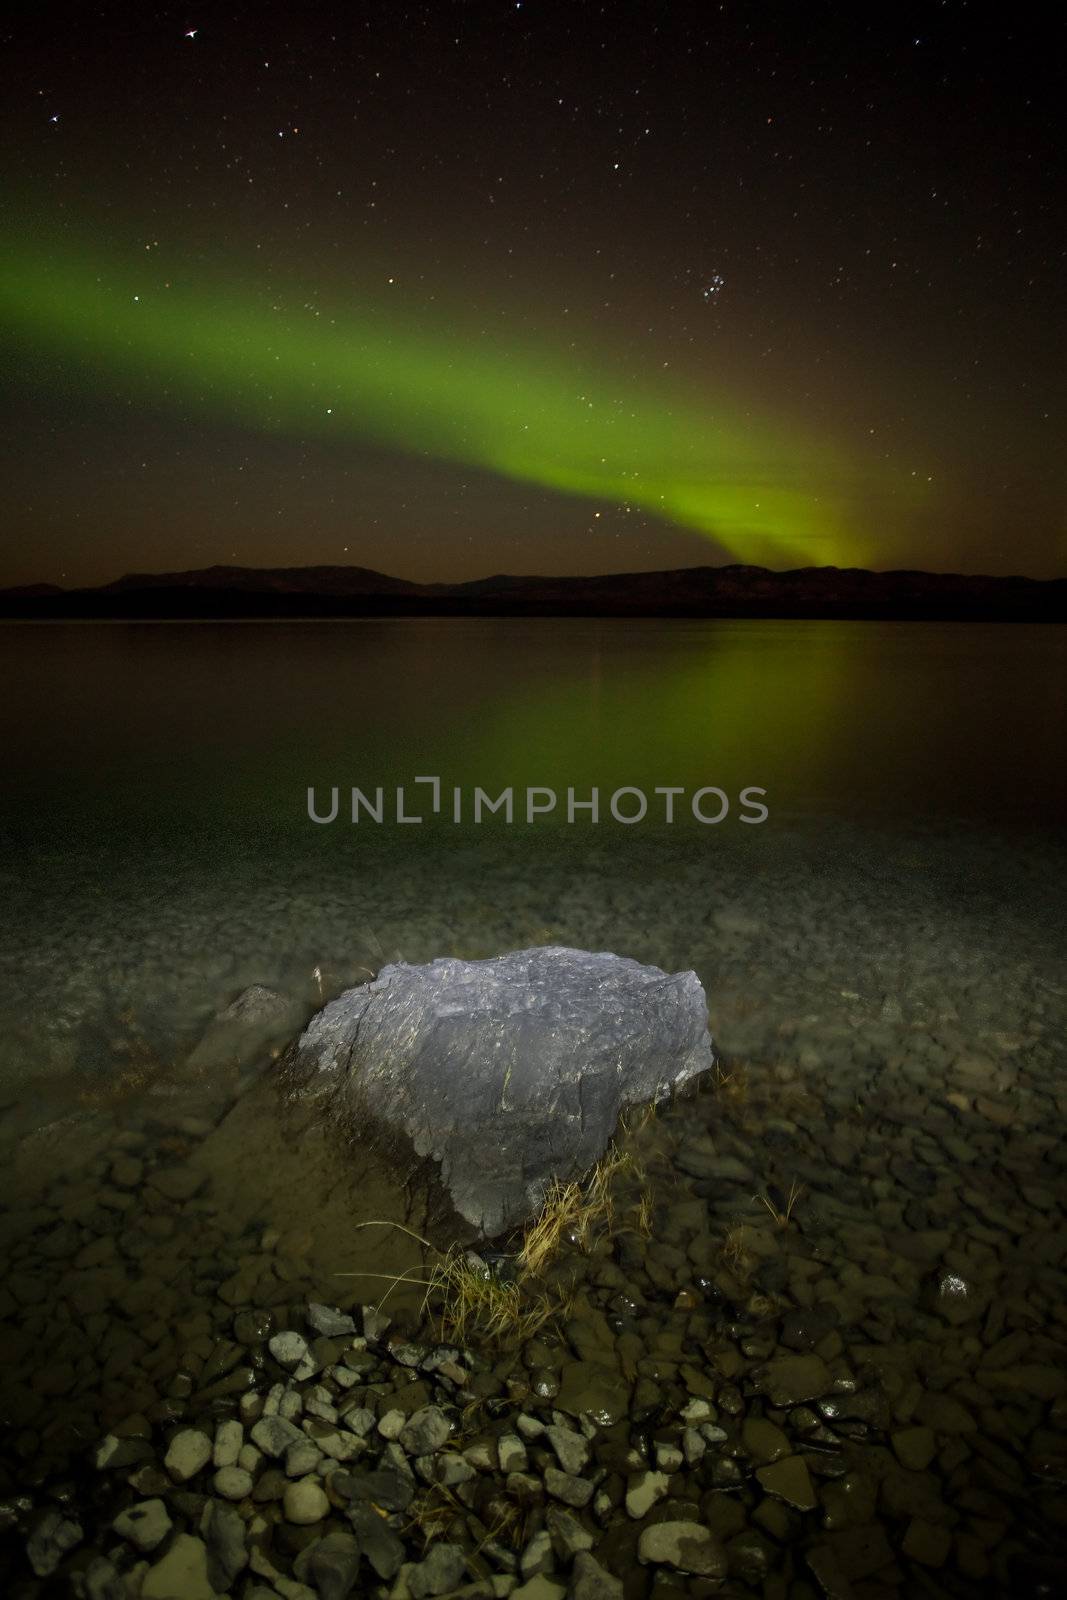 Northern lights mirrored on lake by PiLens